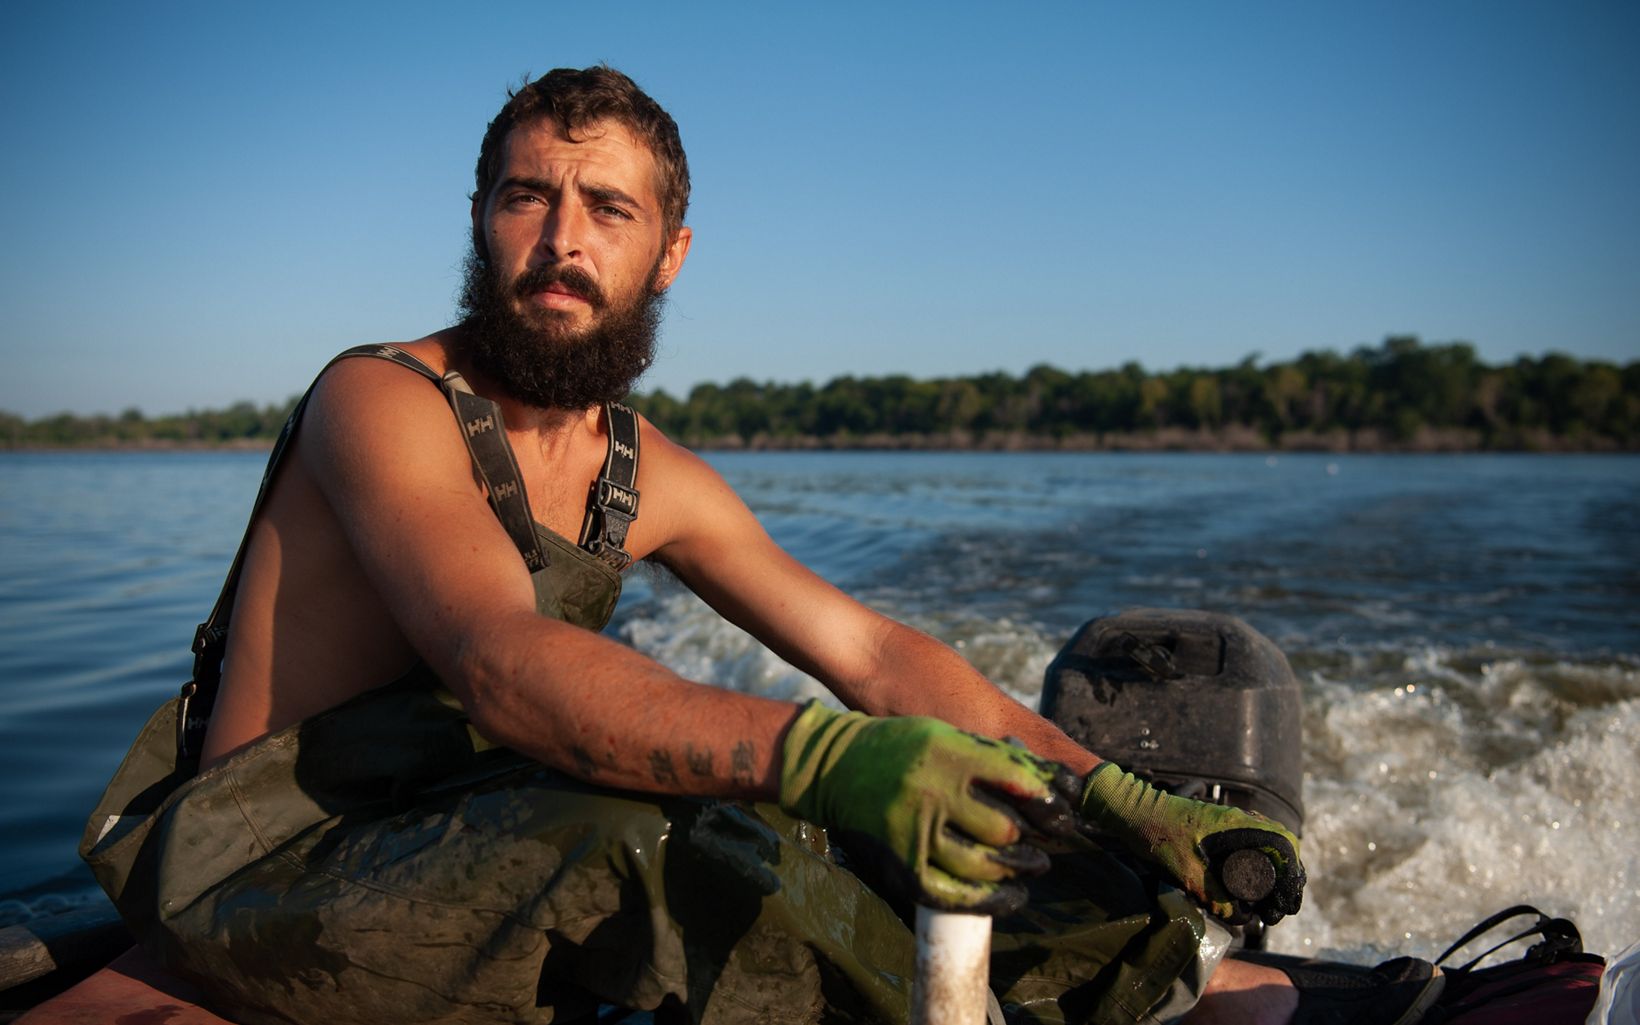 A bearded man stares directly at the camera while he steers a motor boat on a body of water. He is wearing fishing overalls.